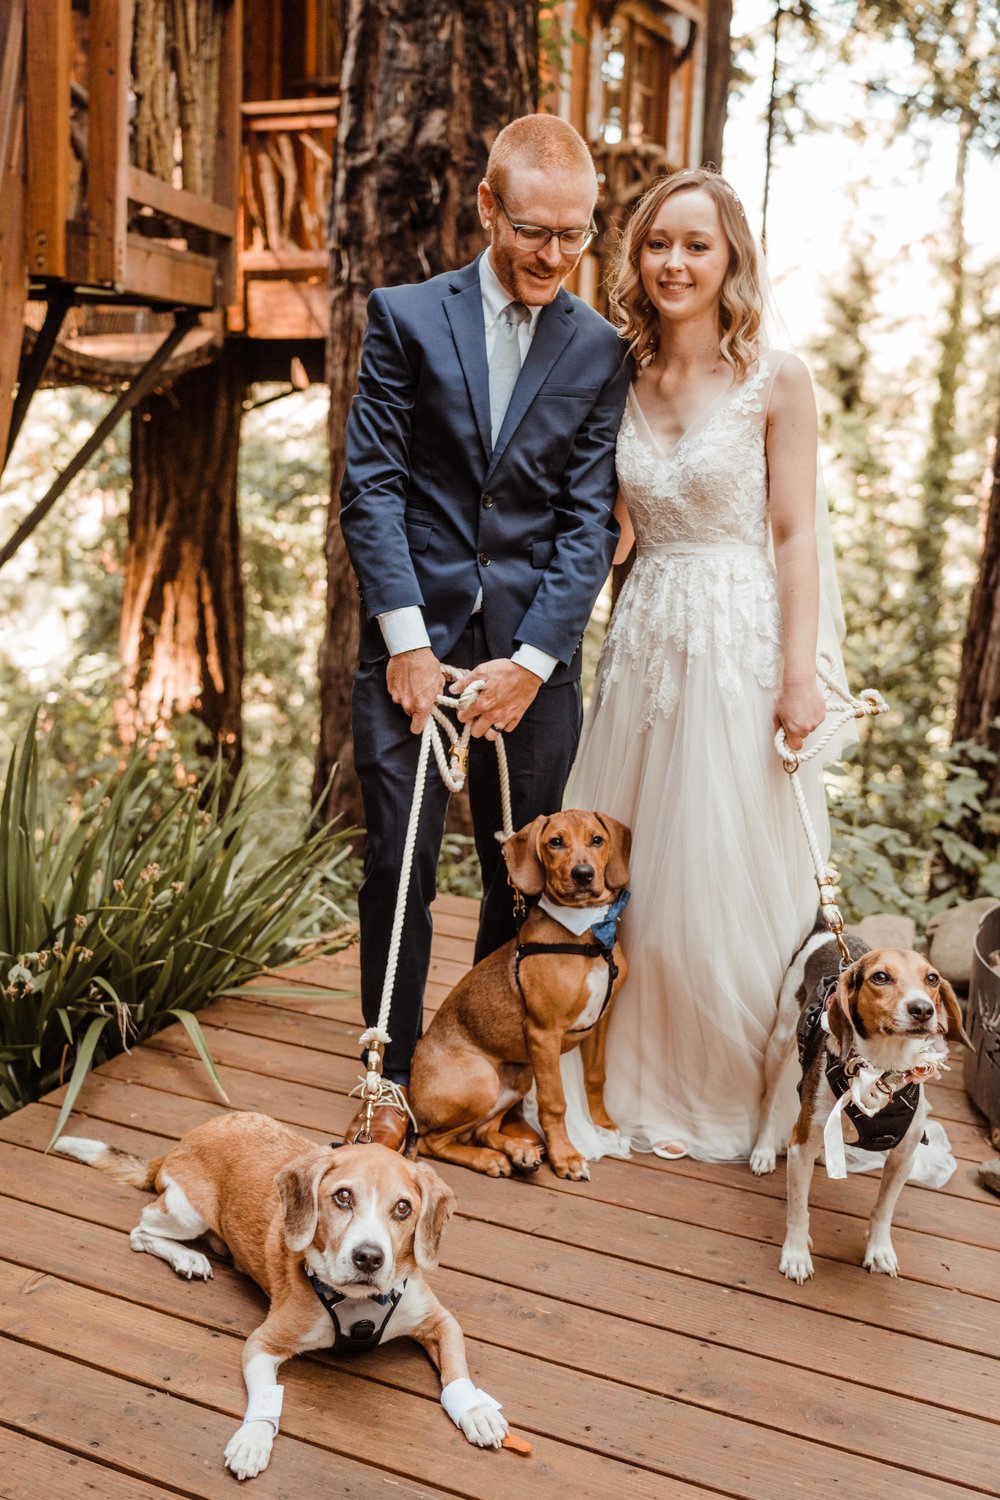 Wedding-in-the-Woods-Eloping-bride-and-groom-with-three-rescue-dogs-in-wedding-attire (1).jpg